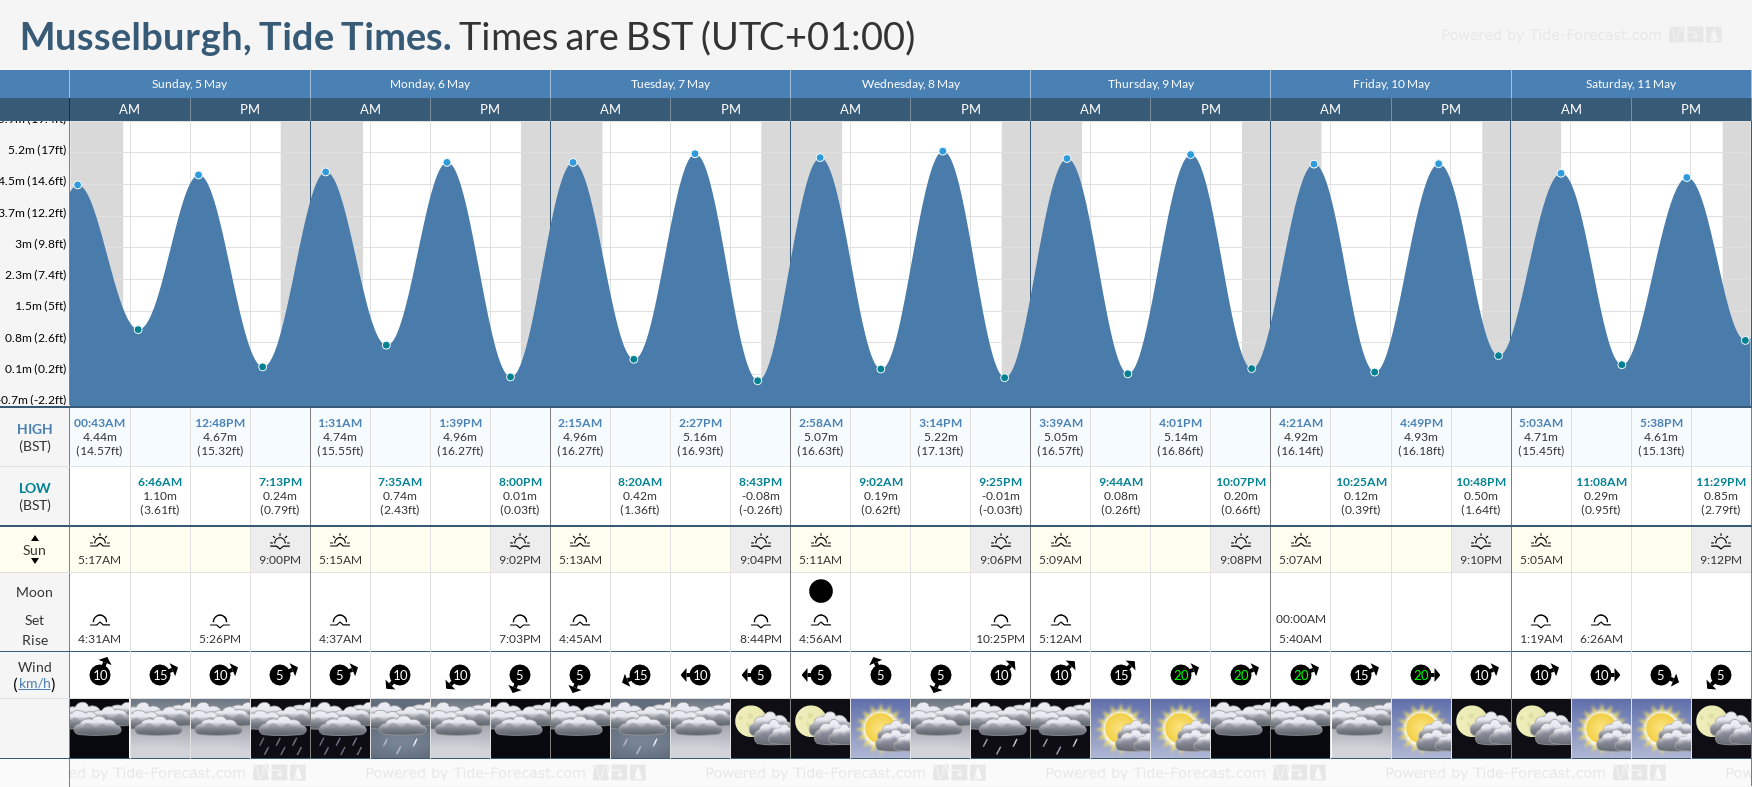 Musselburgh Tide Chart including high and low tide tide times for the next 7 days